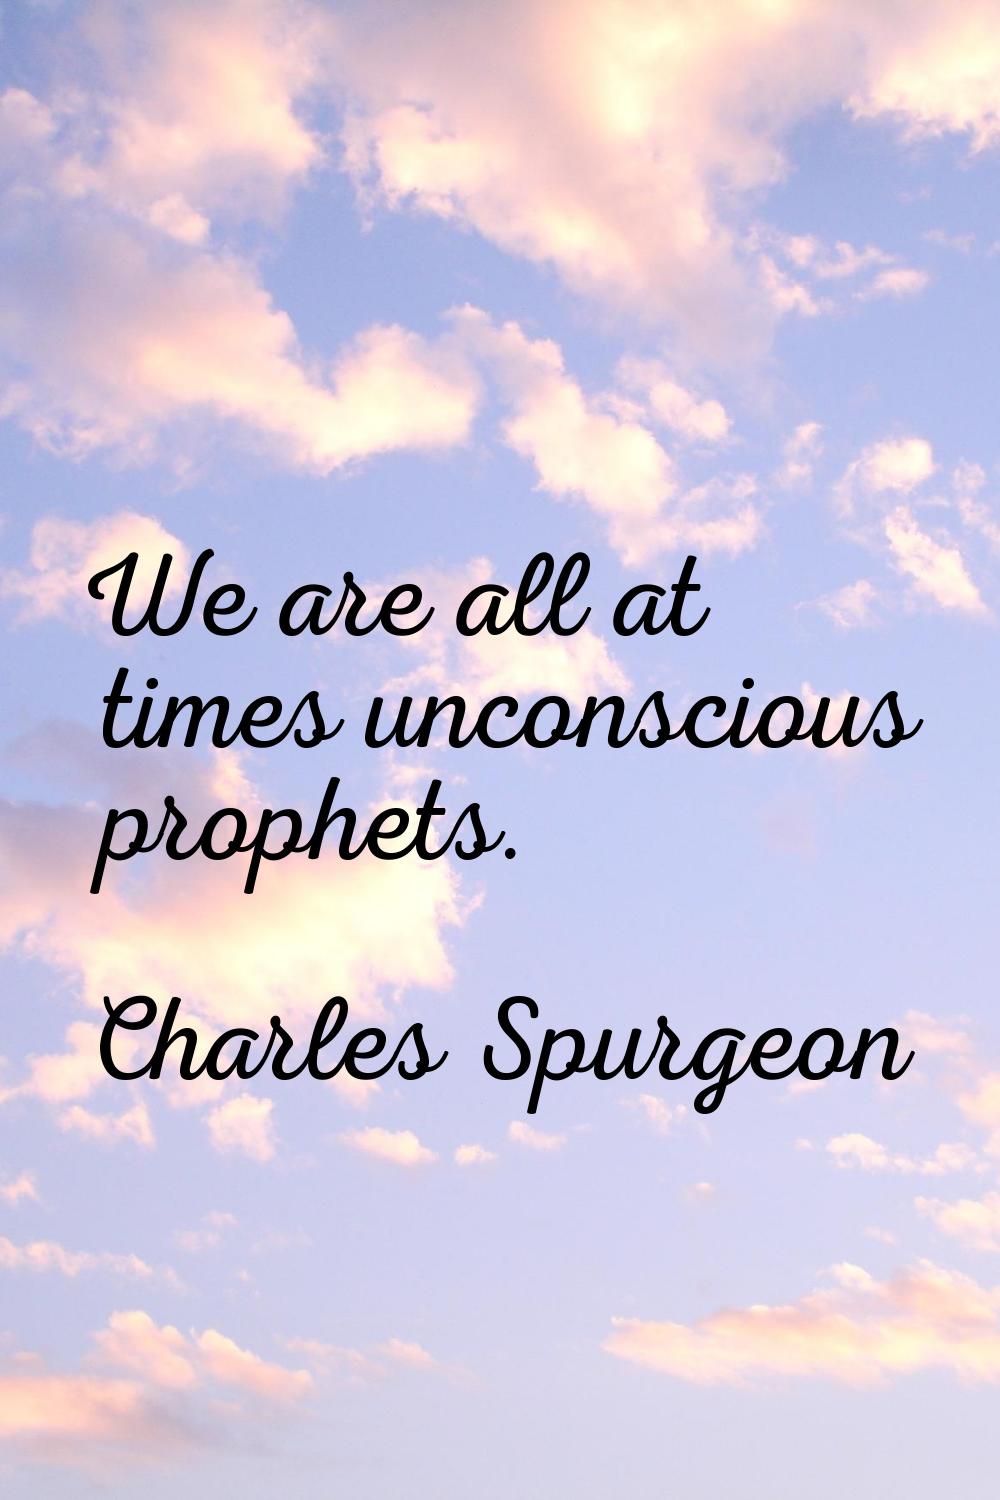 We are all at times unconscious prophets.